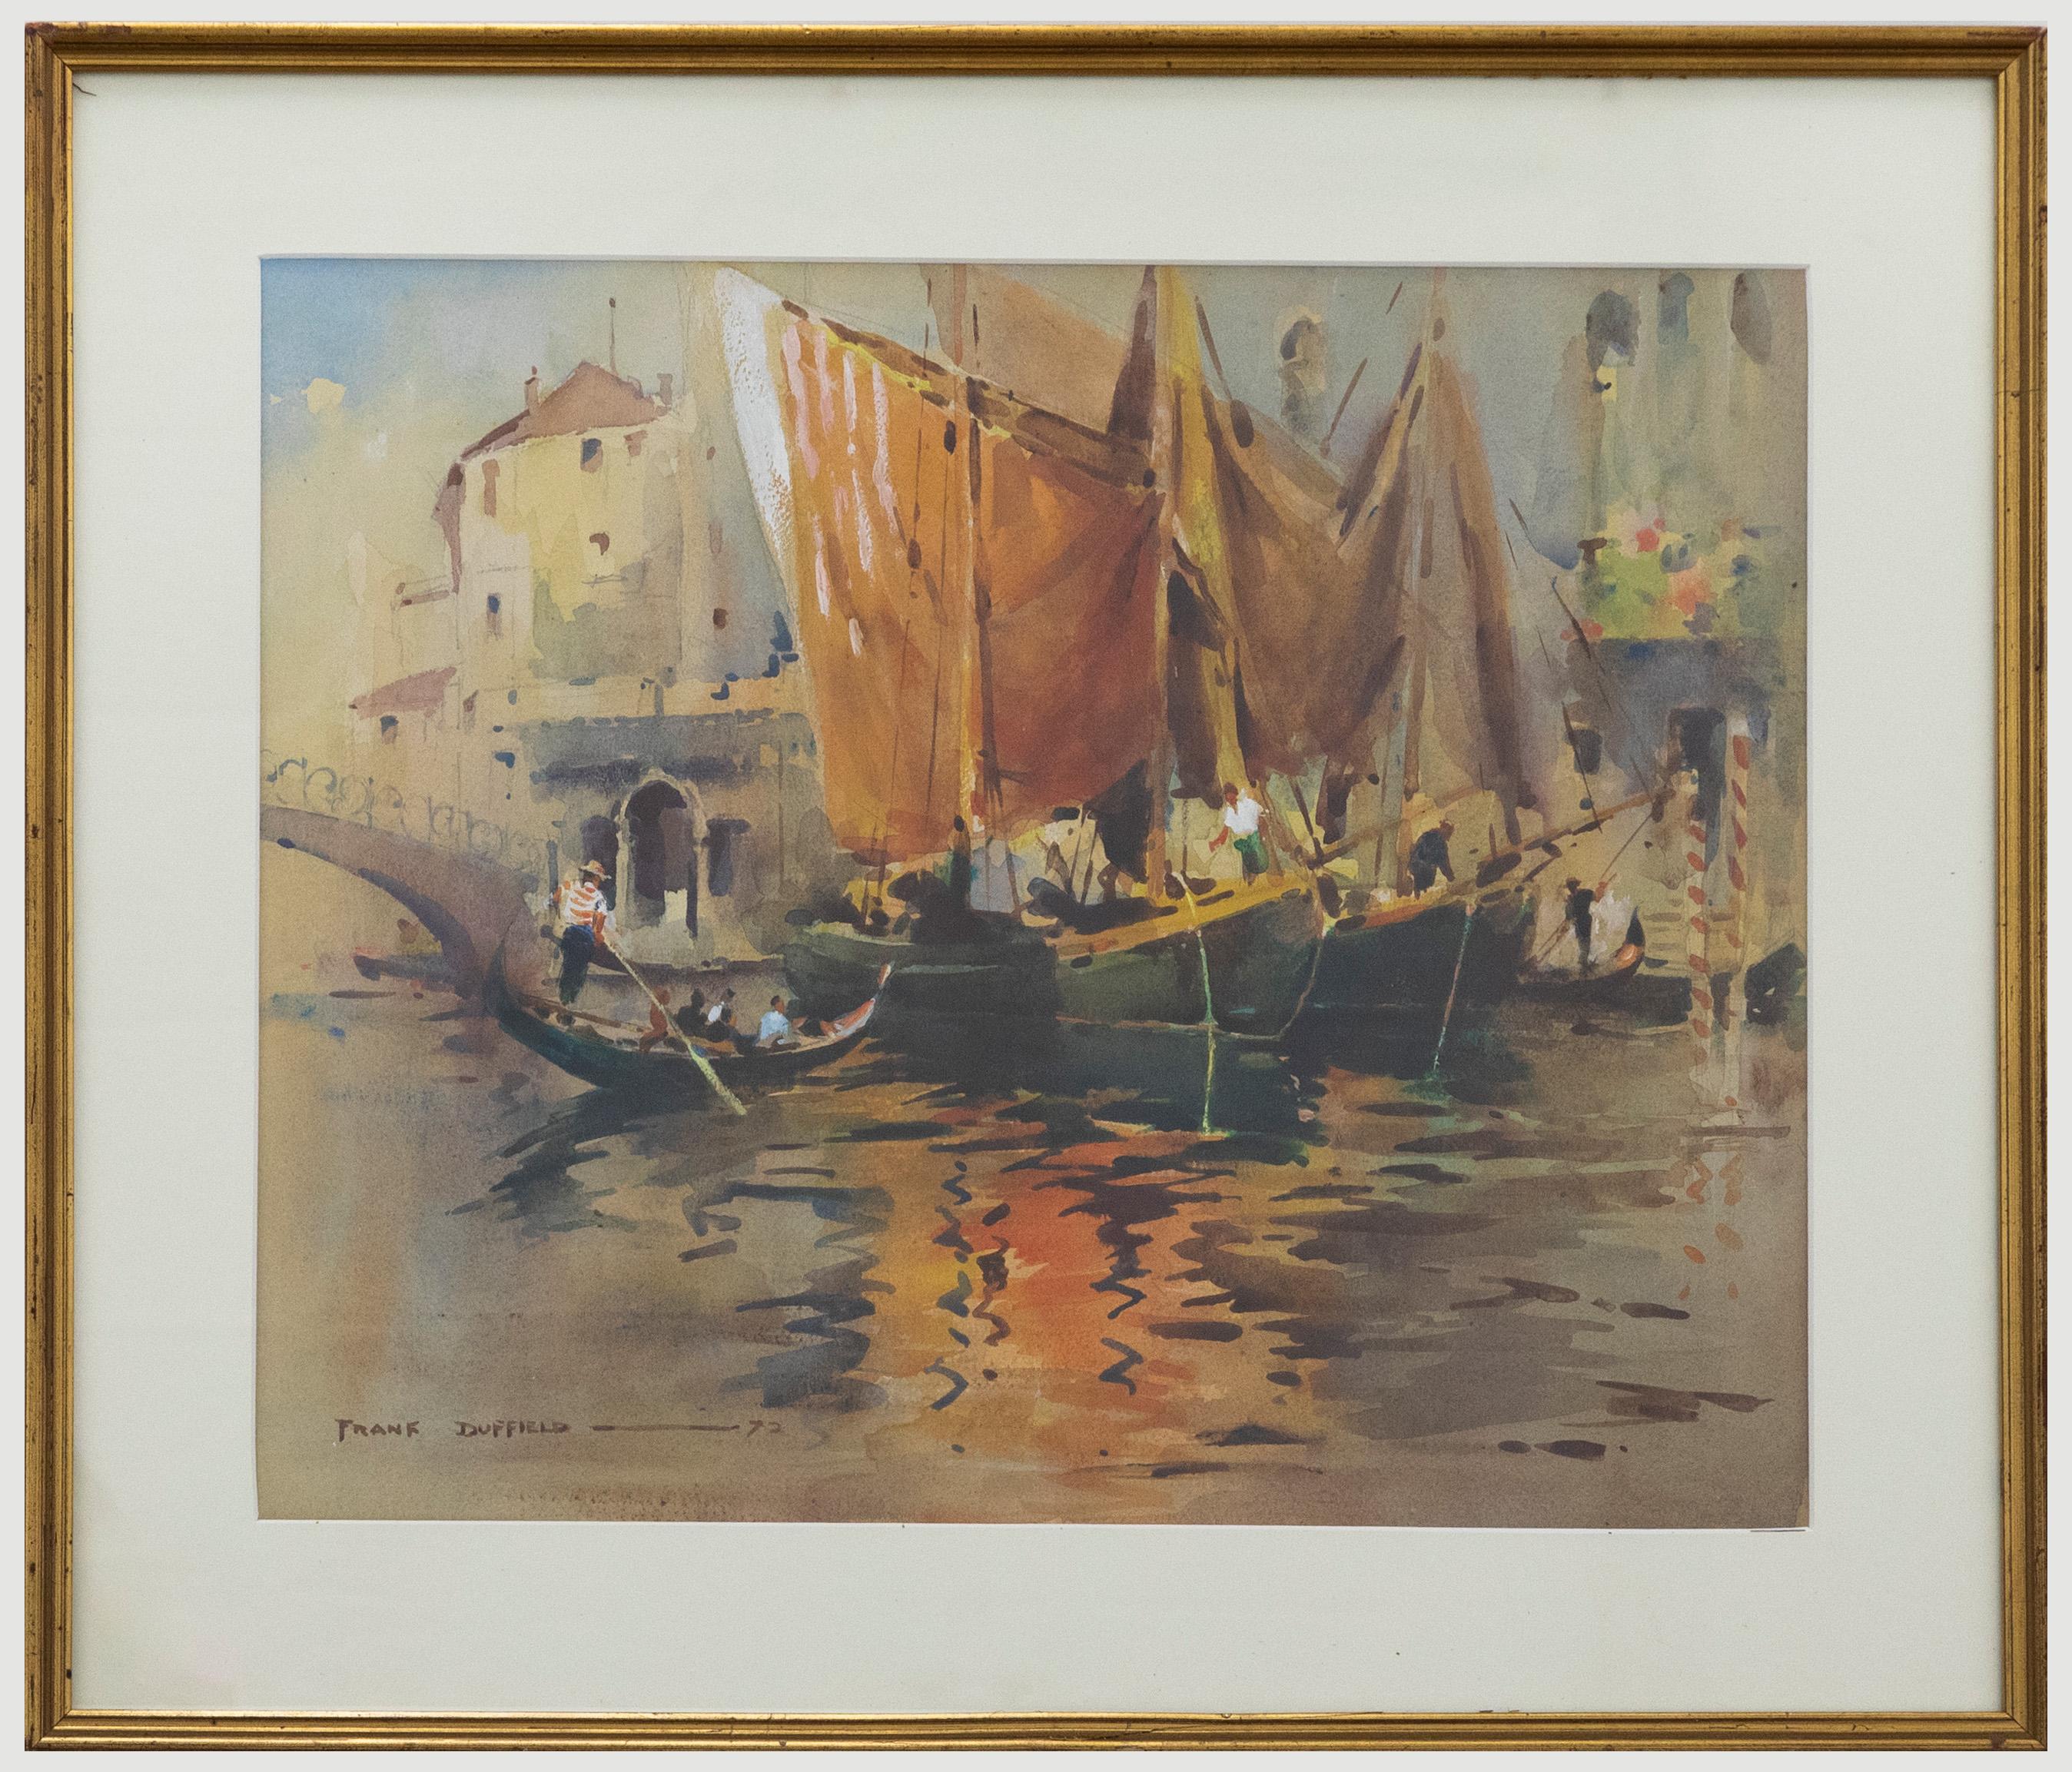 A delightful depiction of gondolas lined up on a Venetian canal. The artist captures the boats in soft watercolour detail with areas of graphite. Signed and dated to the lower right. Presented in a gilt frame. On paper.